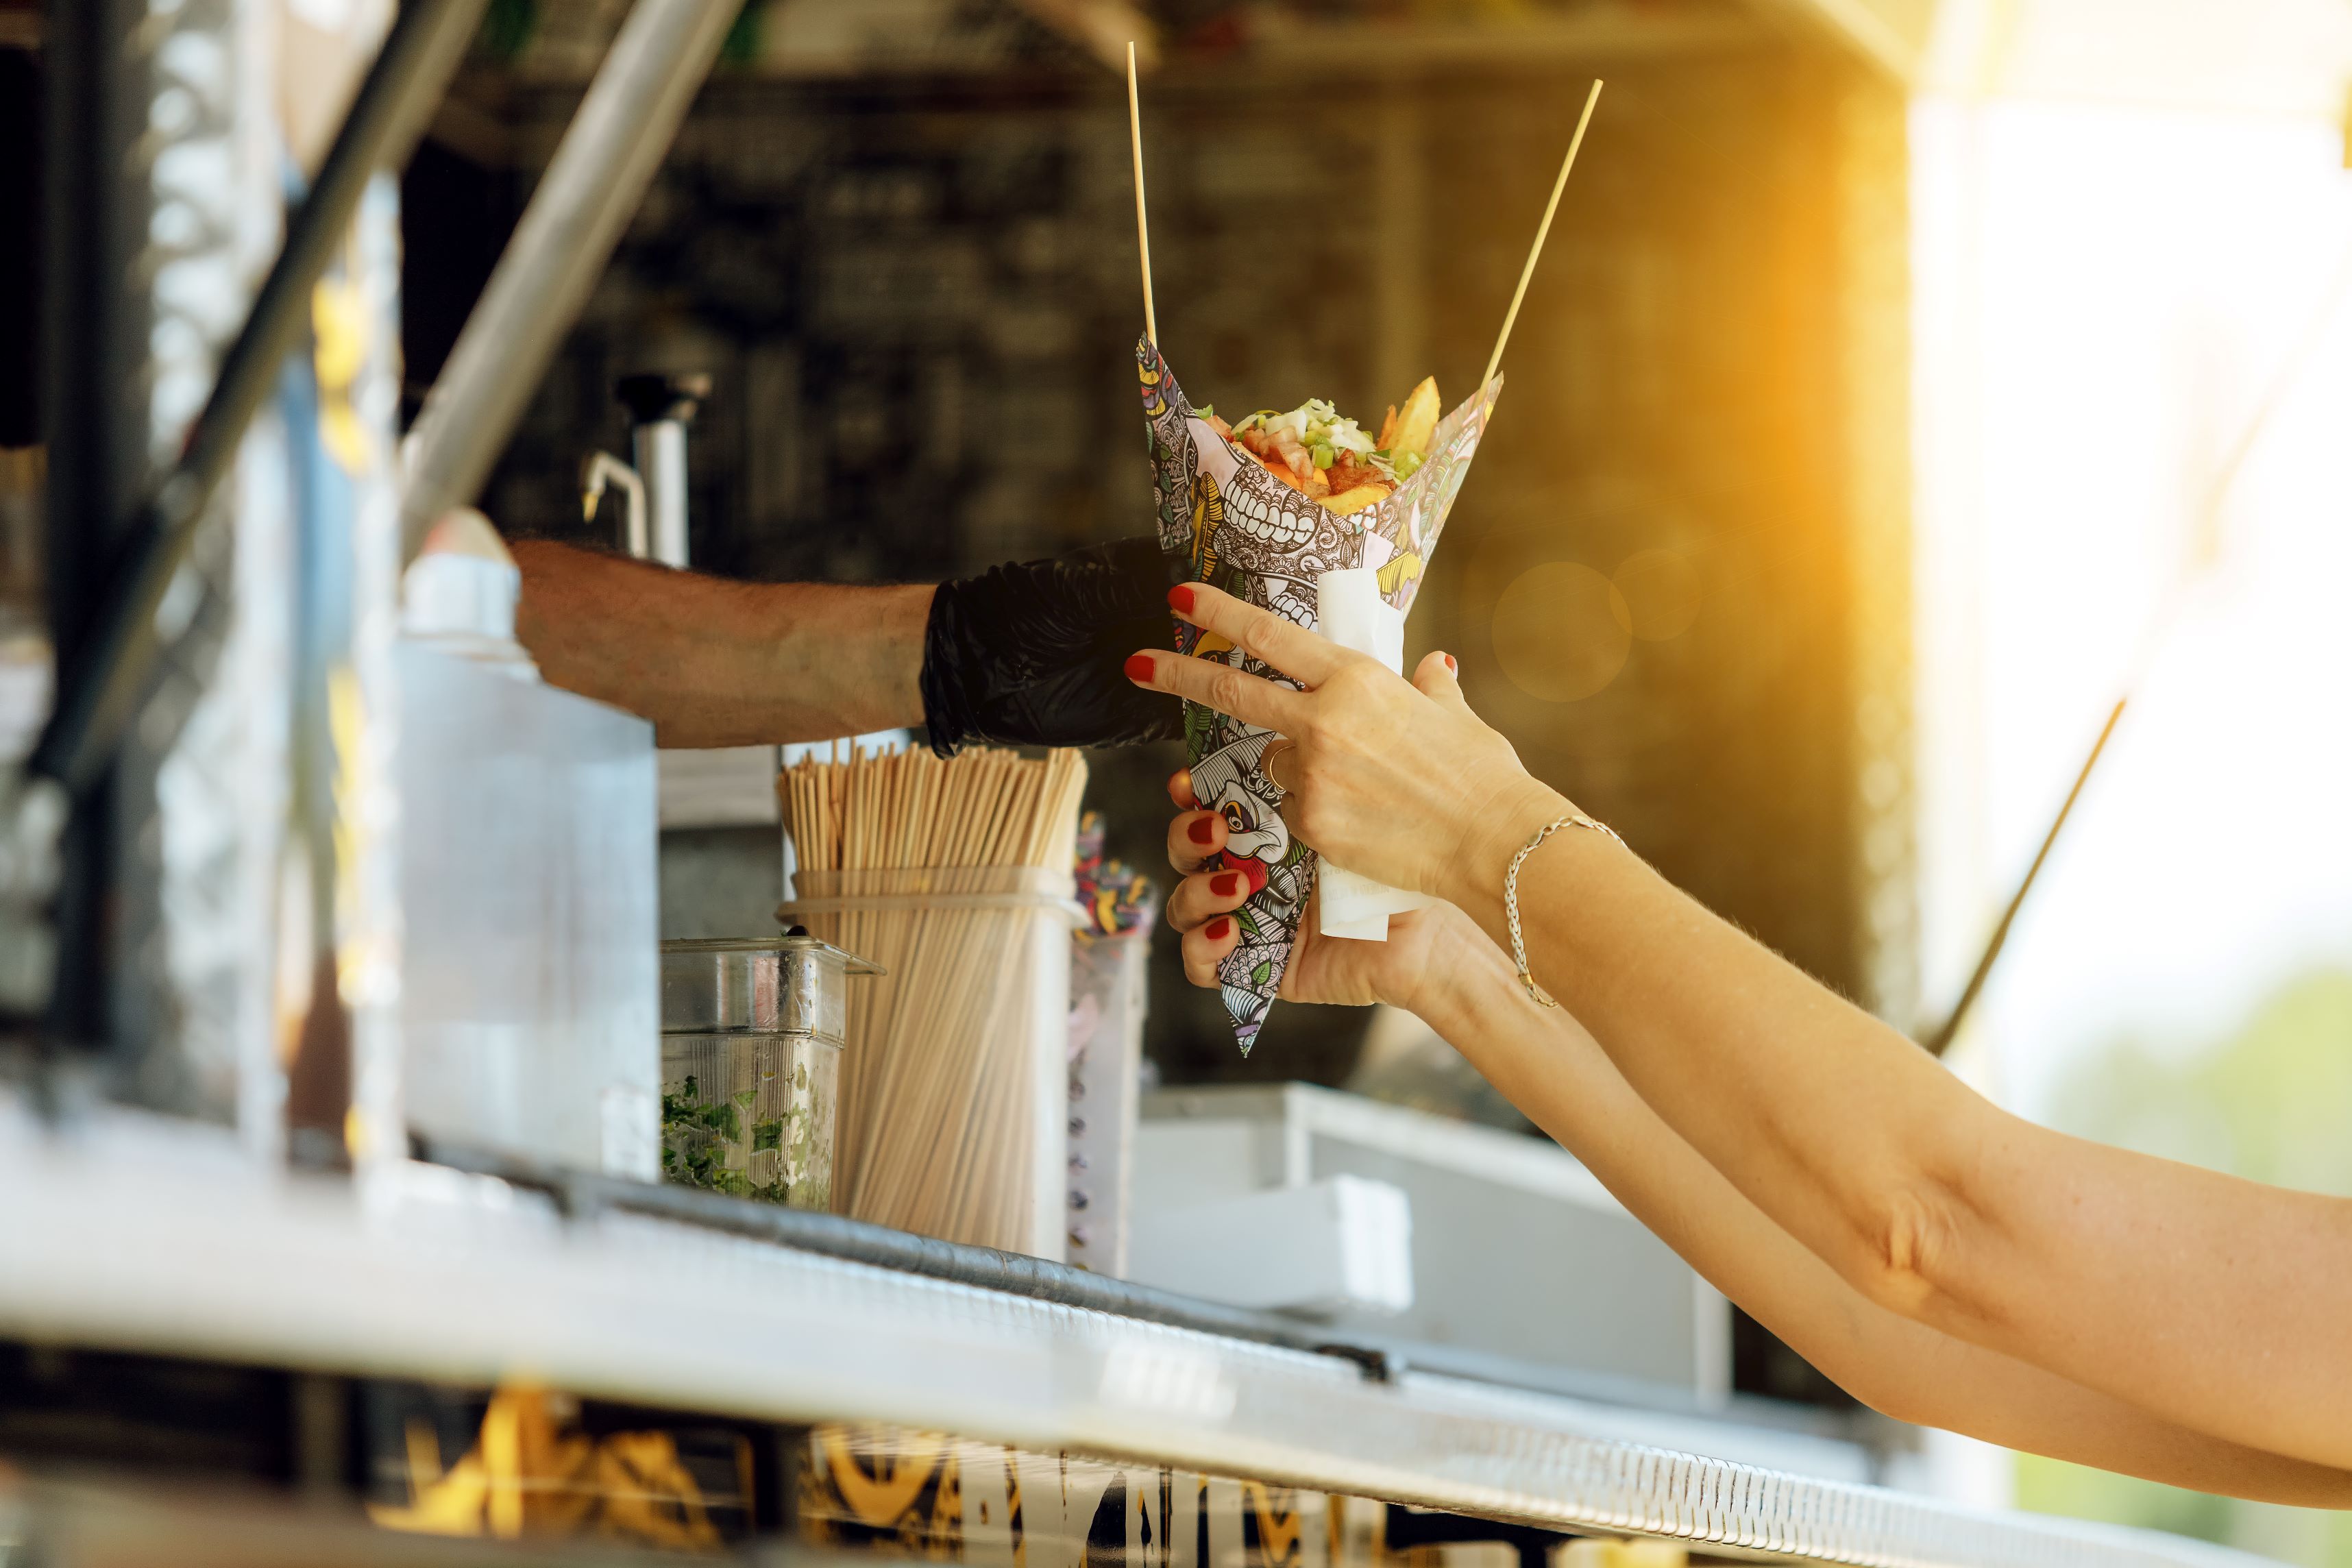 Photo of a gloved hand giving food to another person at a food truck with a sun flare in the background.